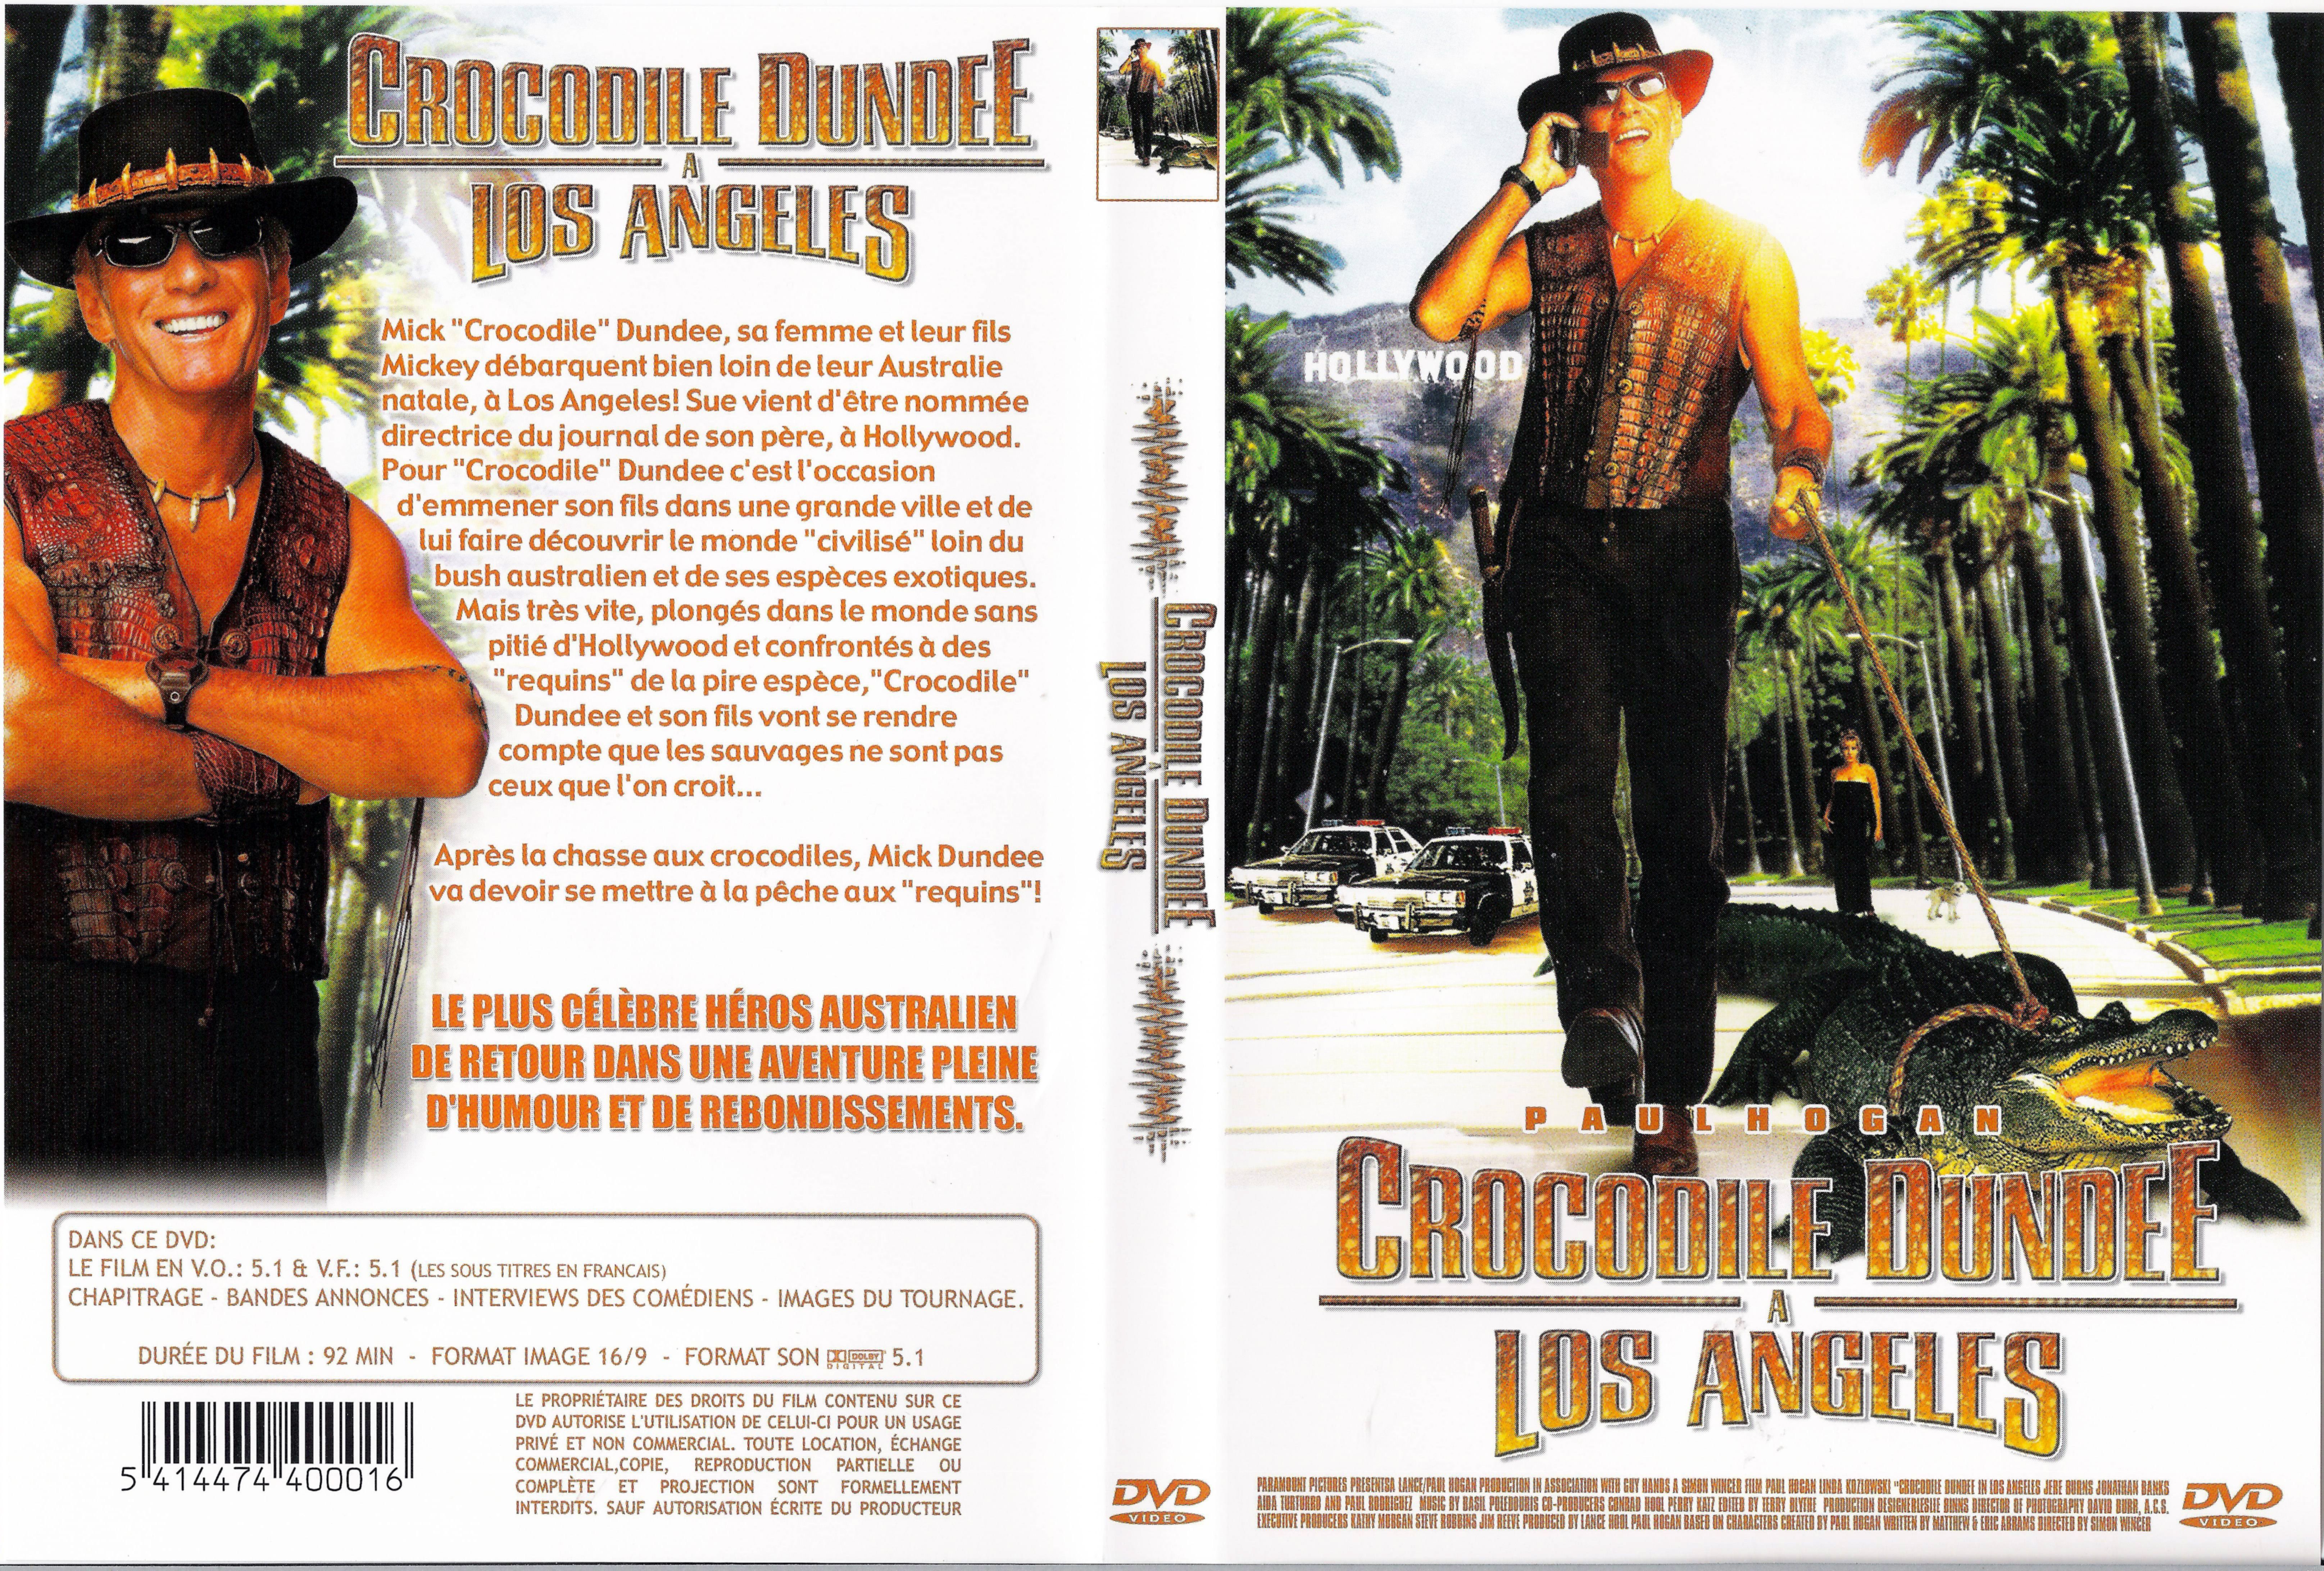 Jaquette DVD Crocodile Dundee 3 v2